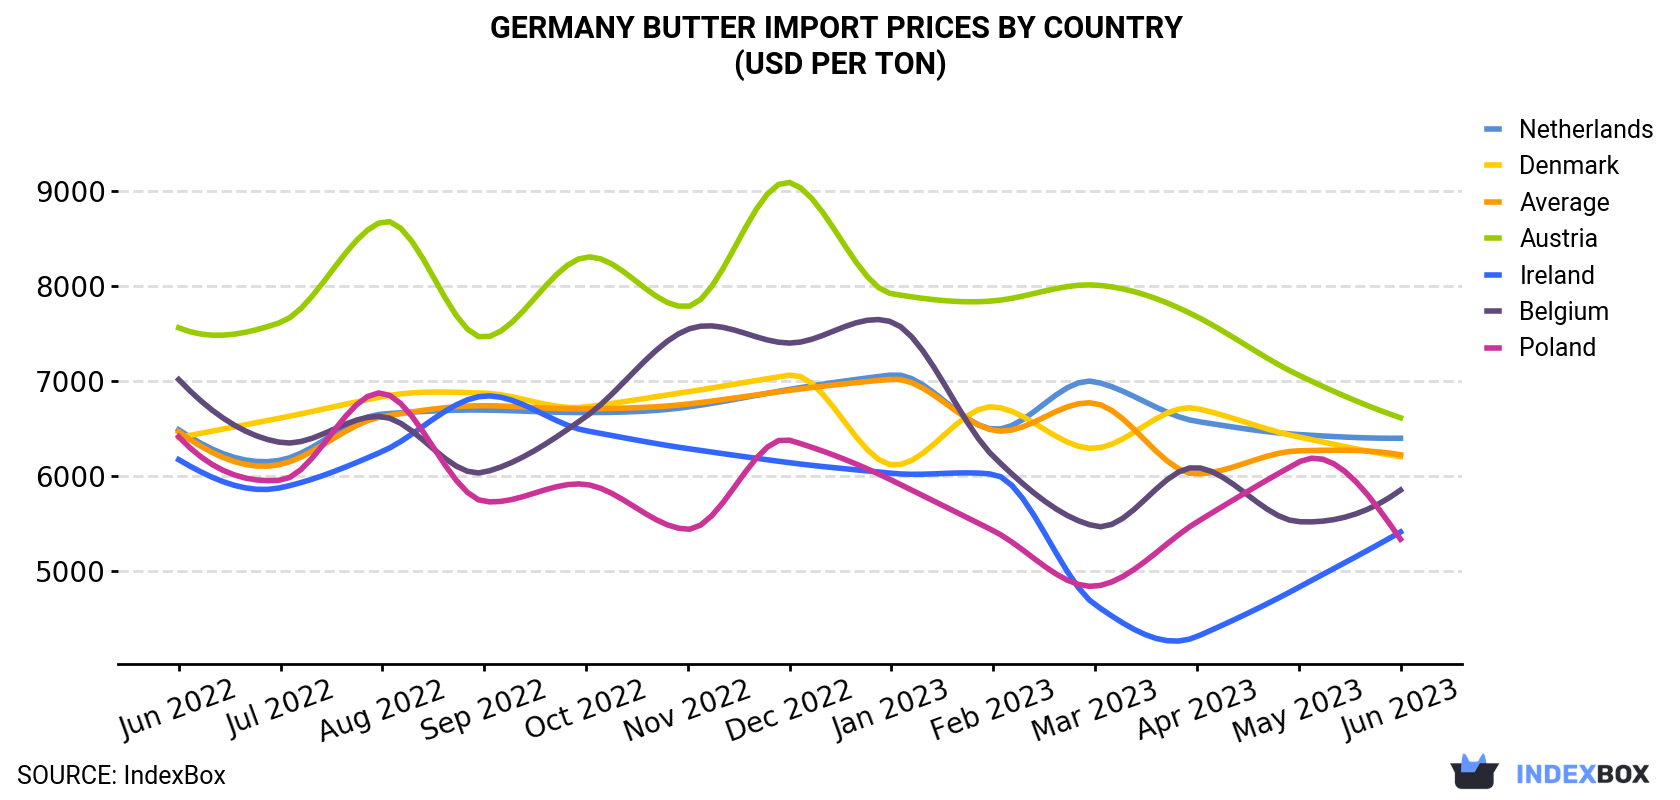 Germany Butter Import Prices By Country (USD Per Ton)